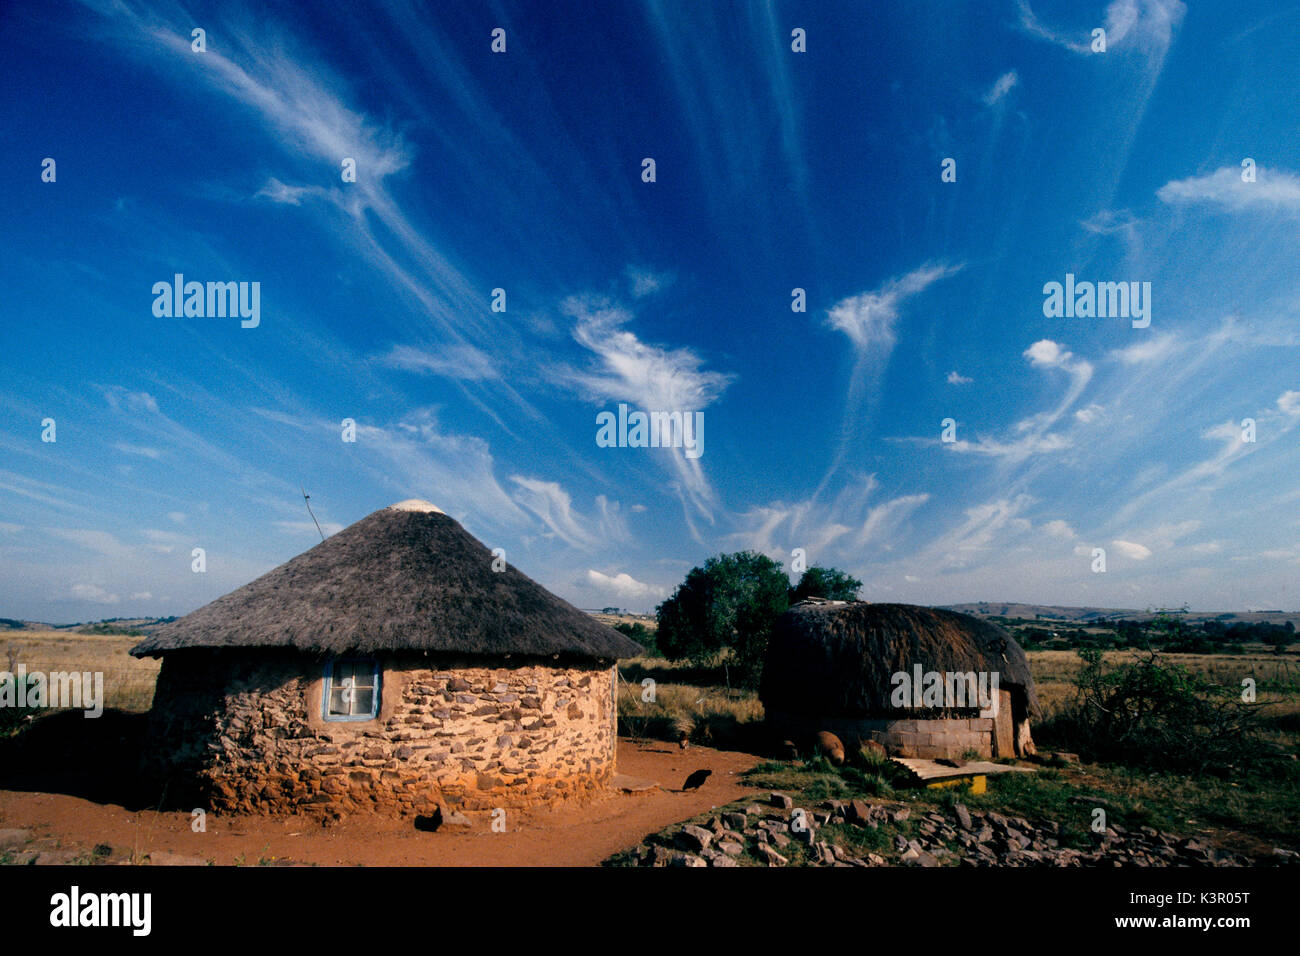 Scattered huts in a village in the Zululand, South Africa Stock Photo